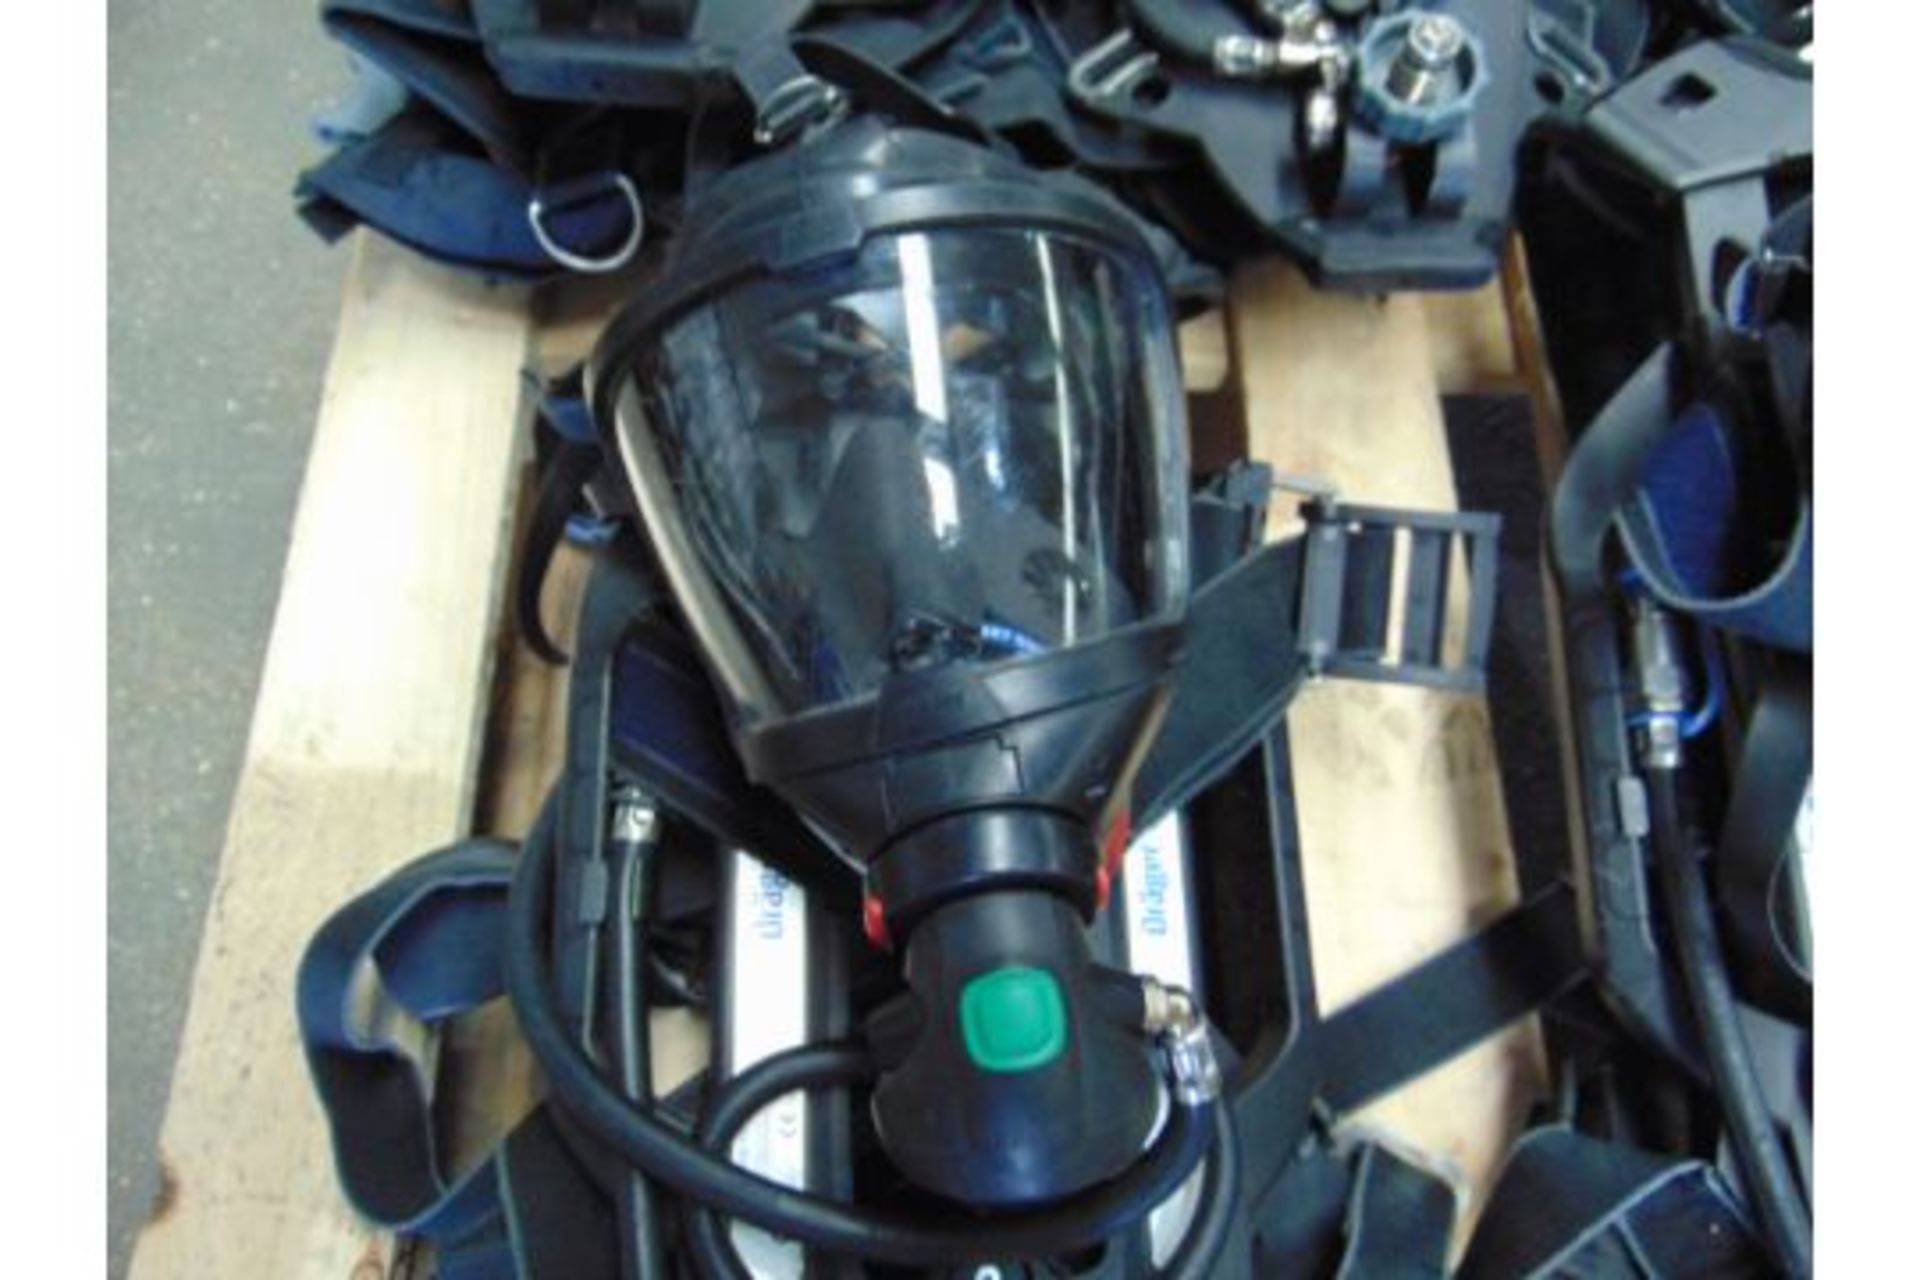 5 x Drager PSS 7000 Self Contained Breathing Apparatus w/ 10 x Drager 300 Bar Air Cylinders - Image 8 of 20